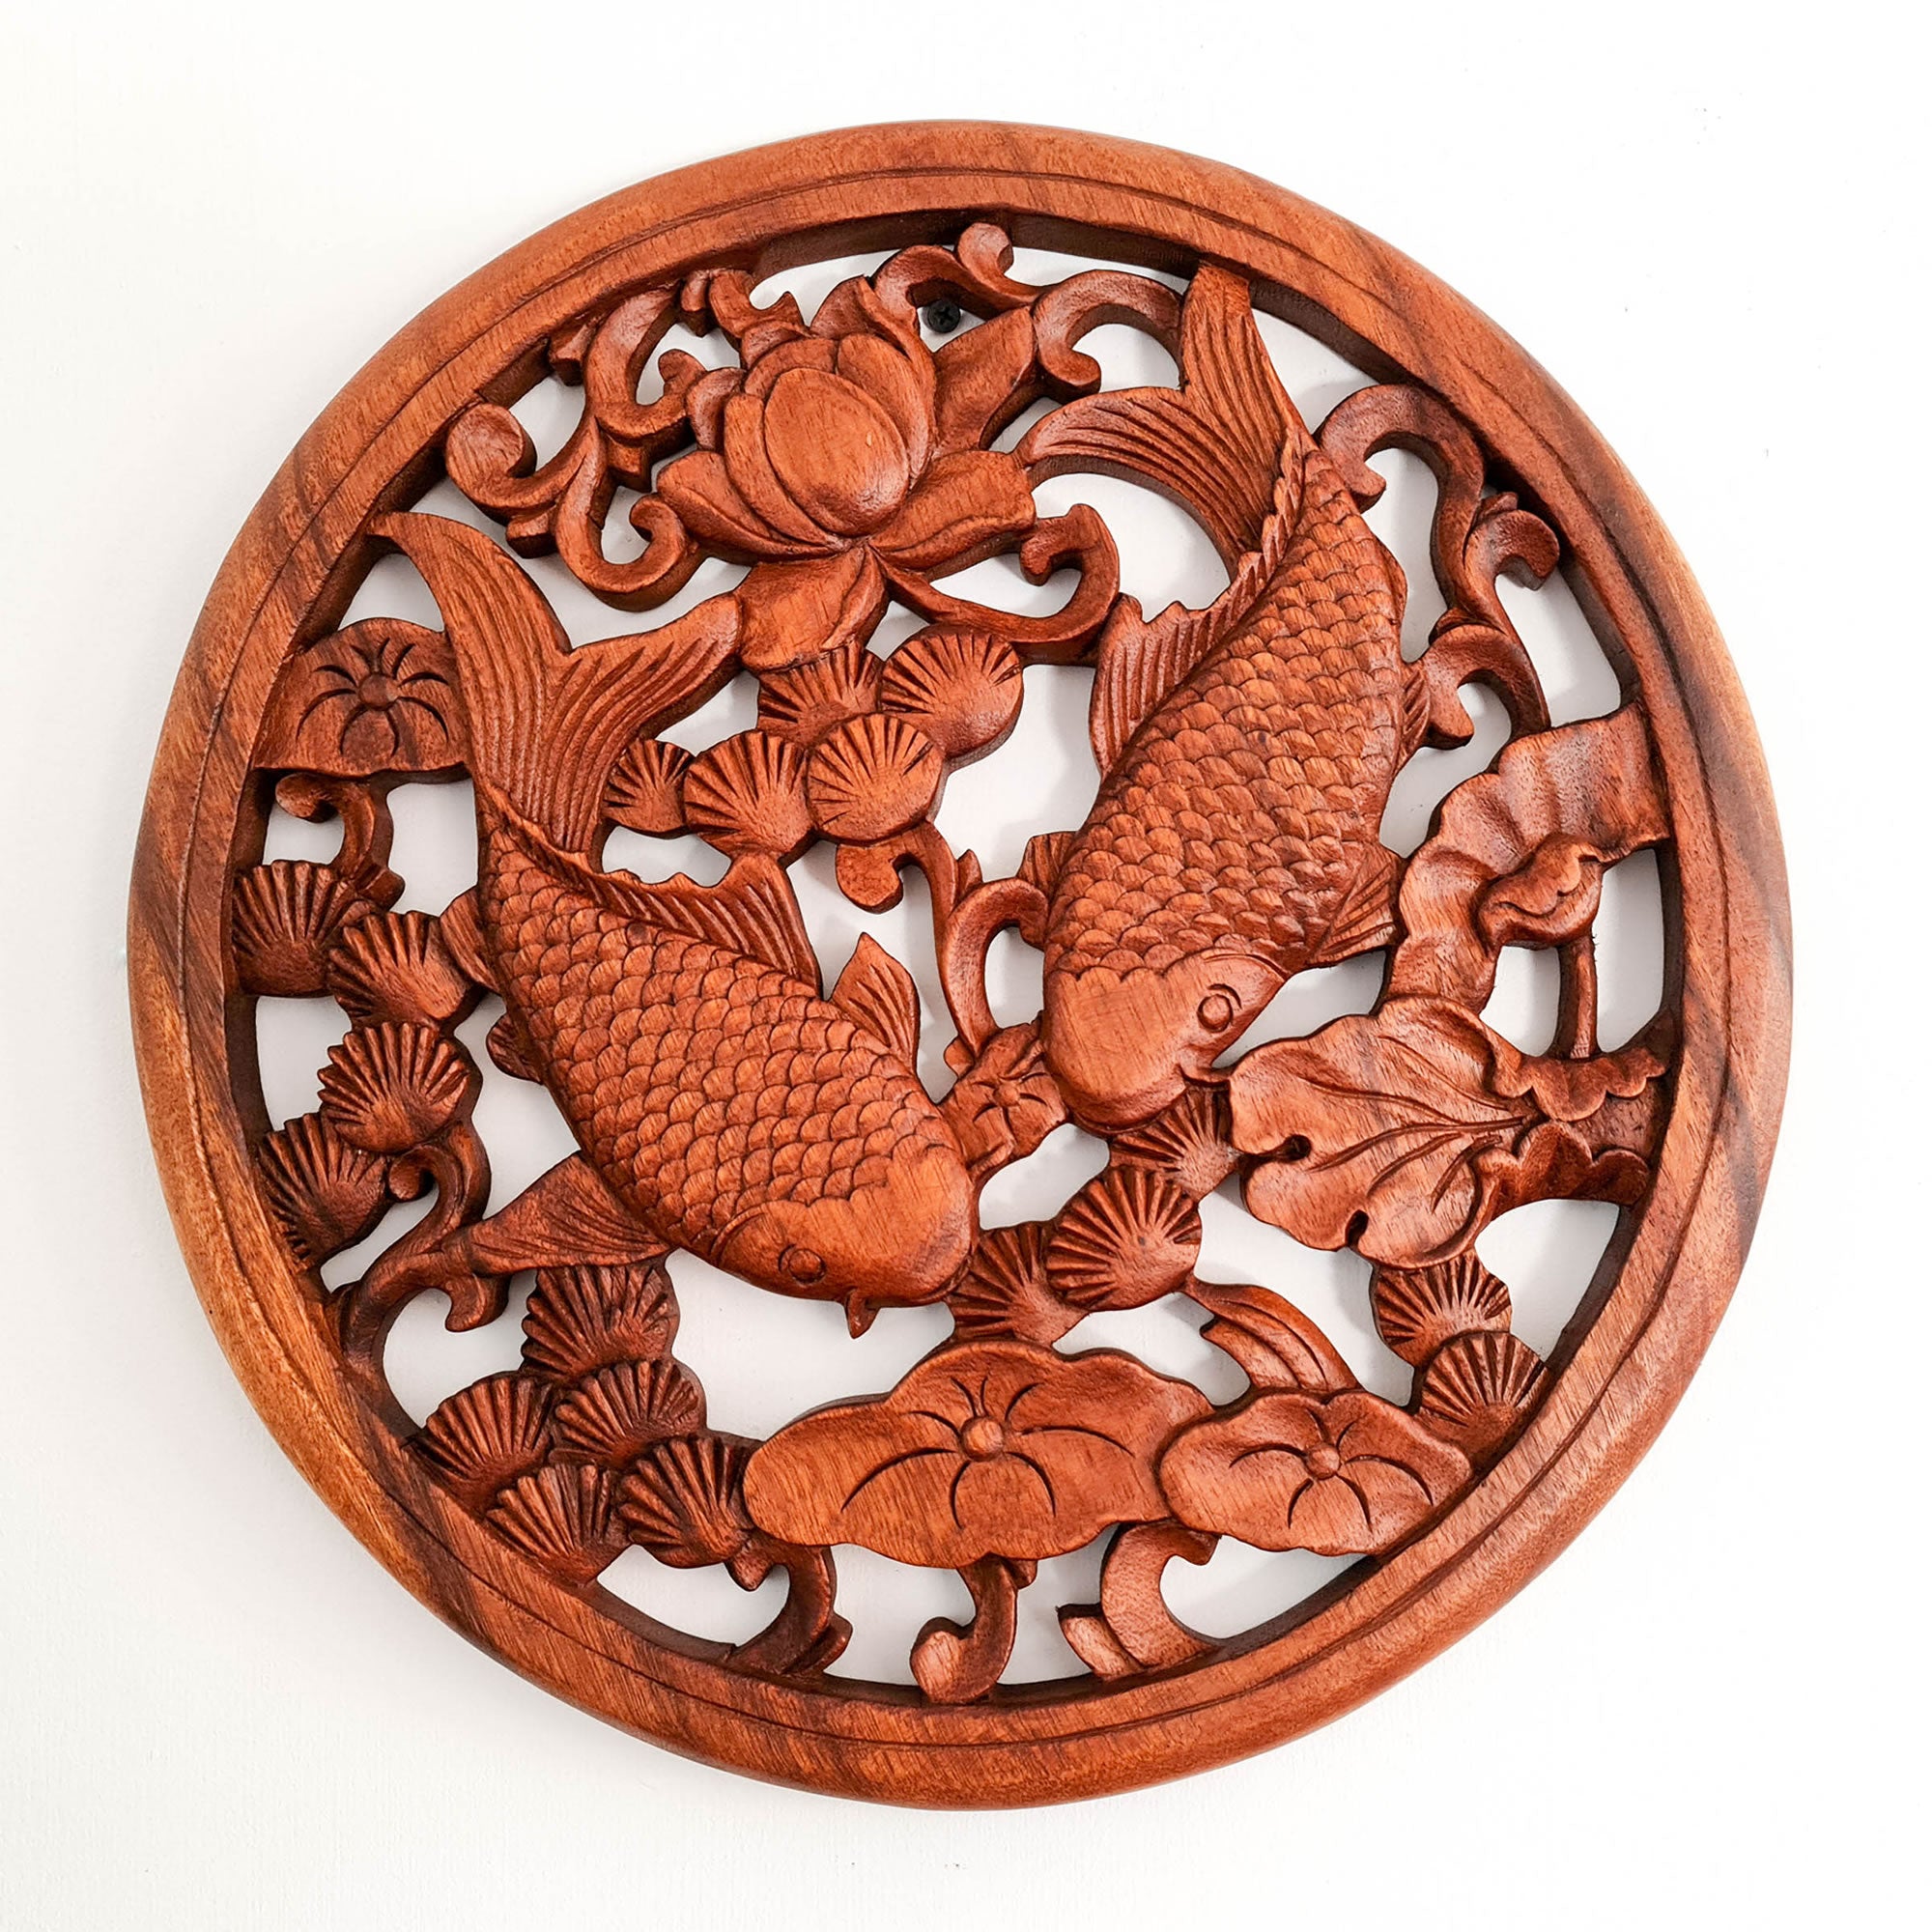 Hand Carved Wooden Wall Art Koi Fishes Decorative Hanging - A perfect Good luck GiftKoi Fishes Good Luck Feng Shui Hand Carved Wooden Wall Art Decoration Hanging - Perfect Unique Gift